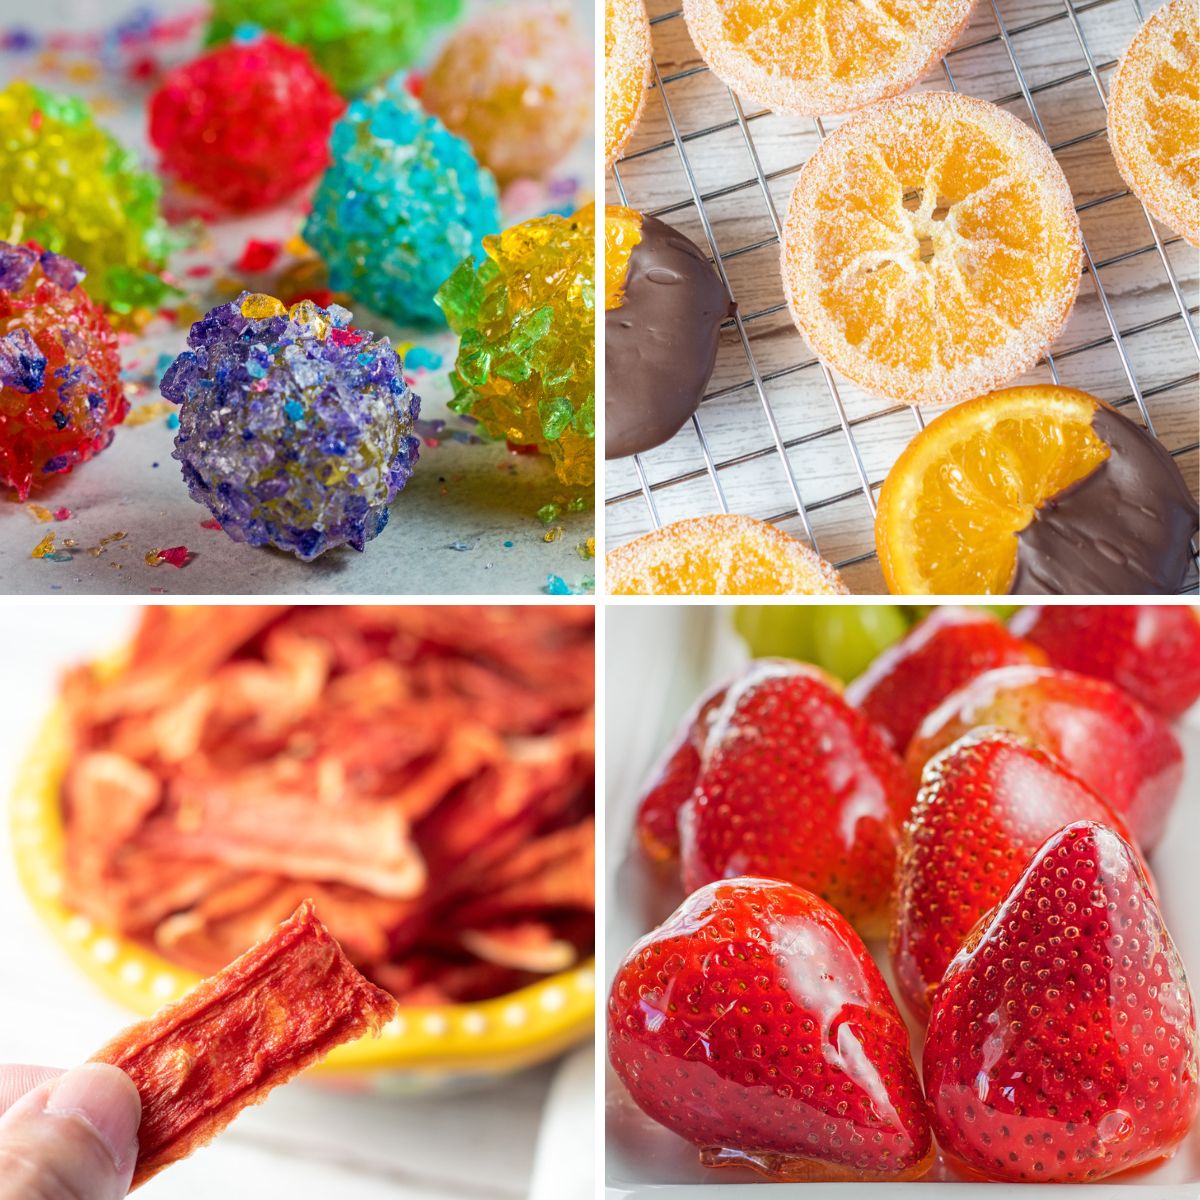 Candied Fruit Recipes: Candied Orange Slices (+More Fruity Treats!)